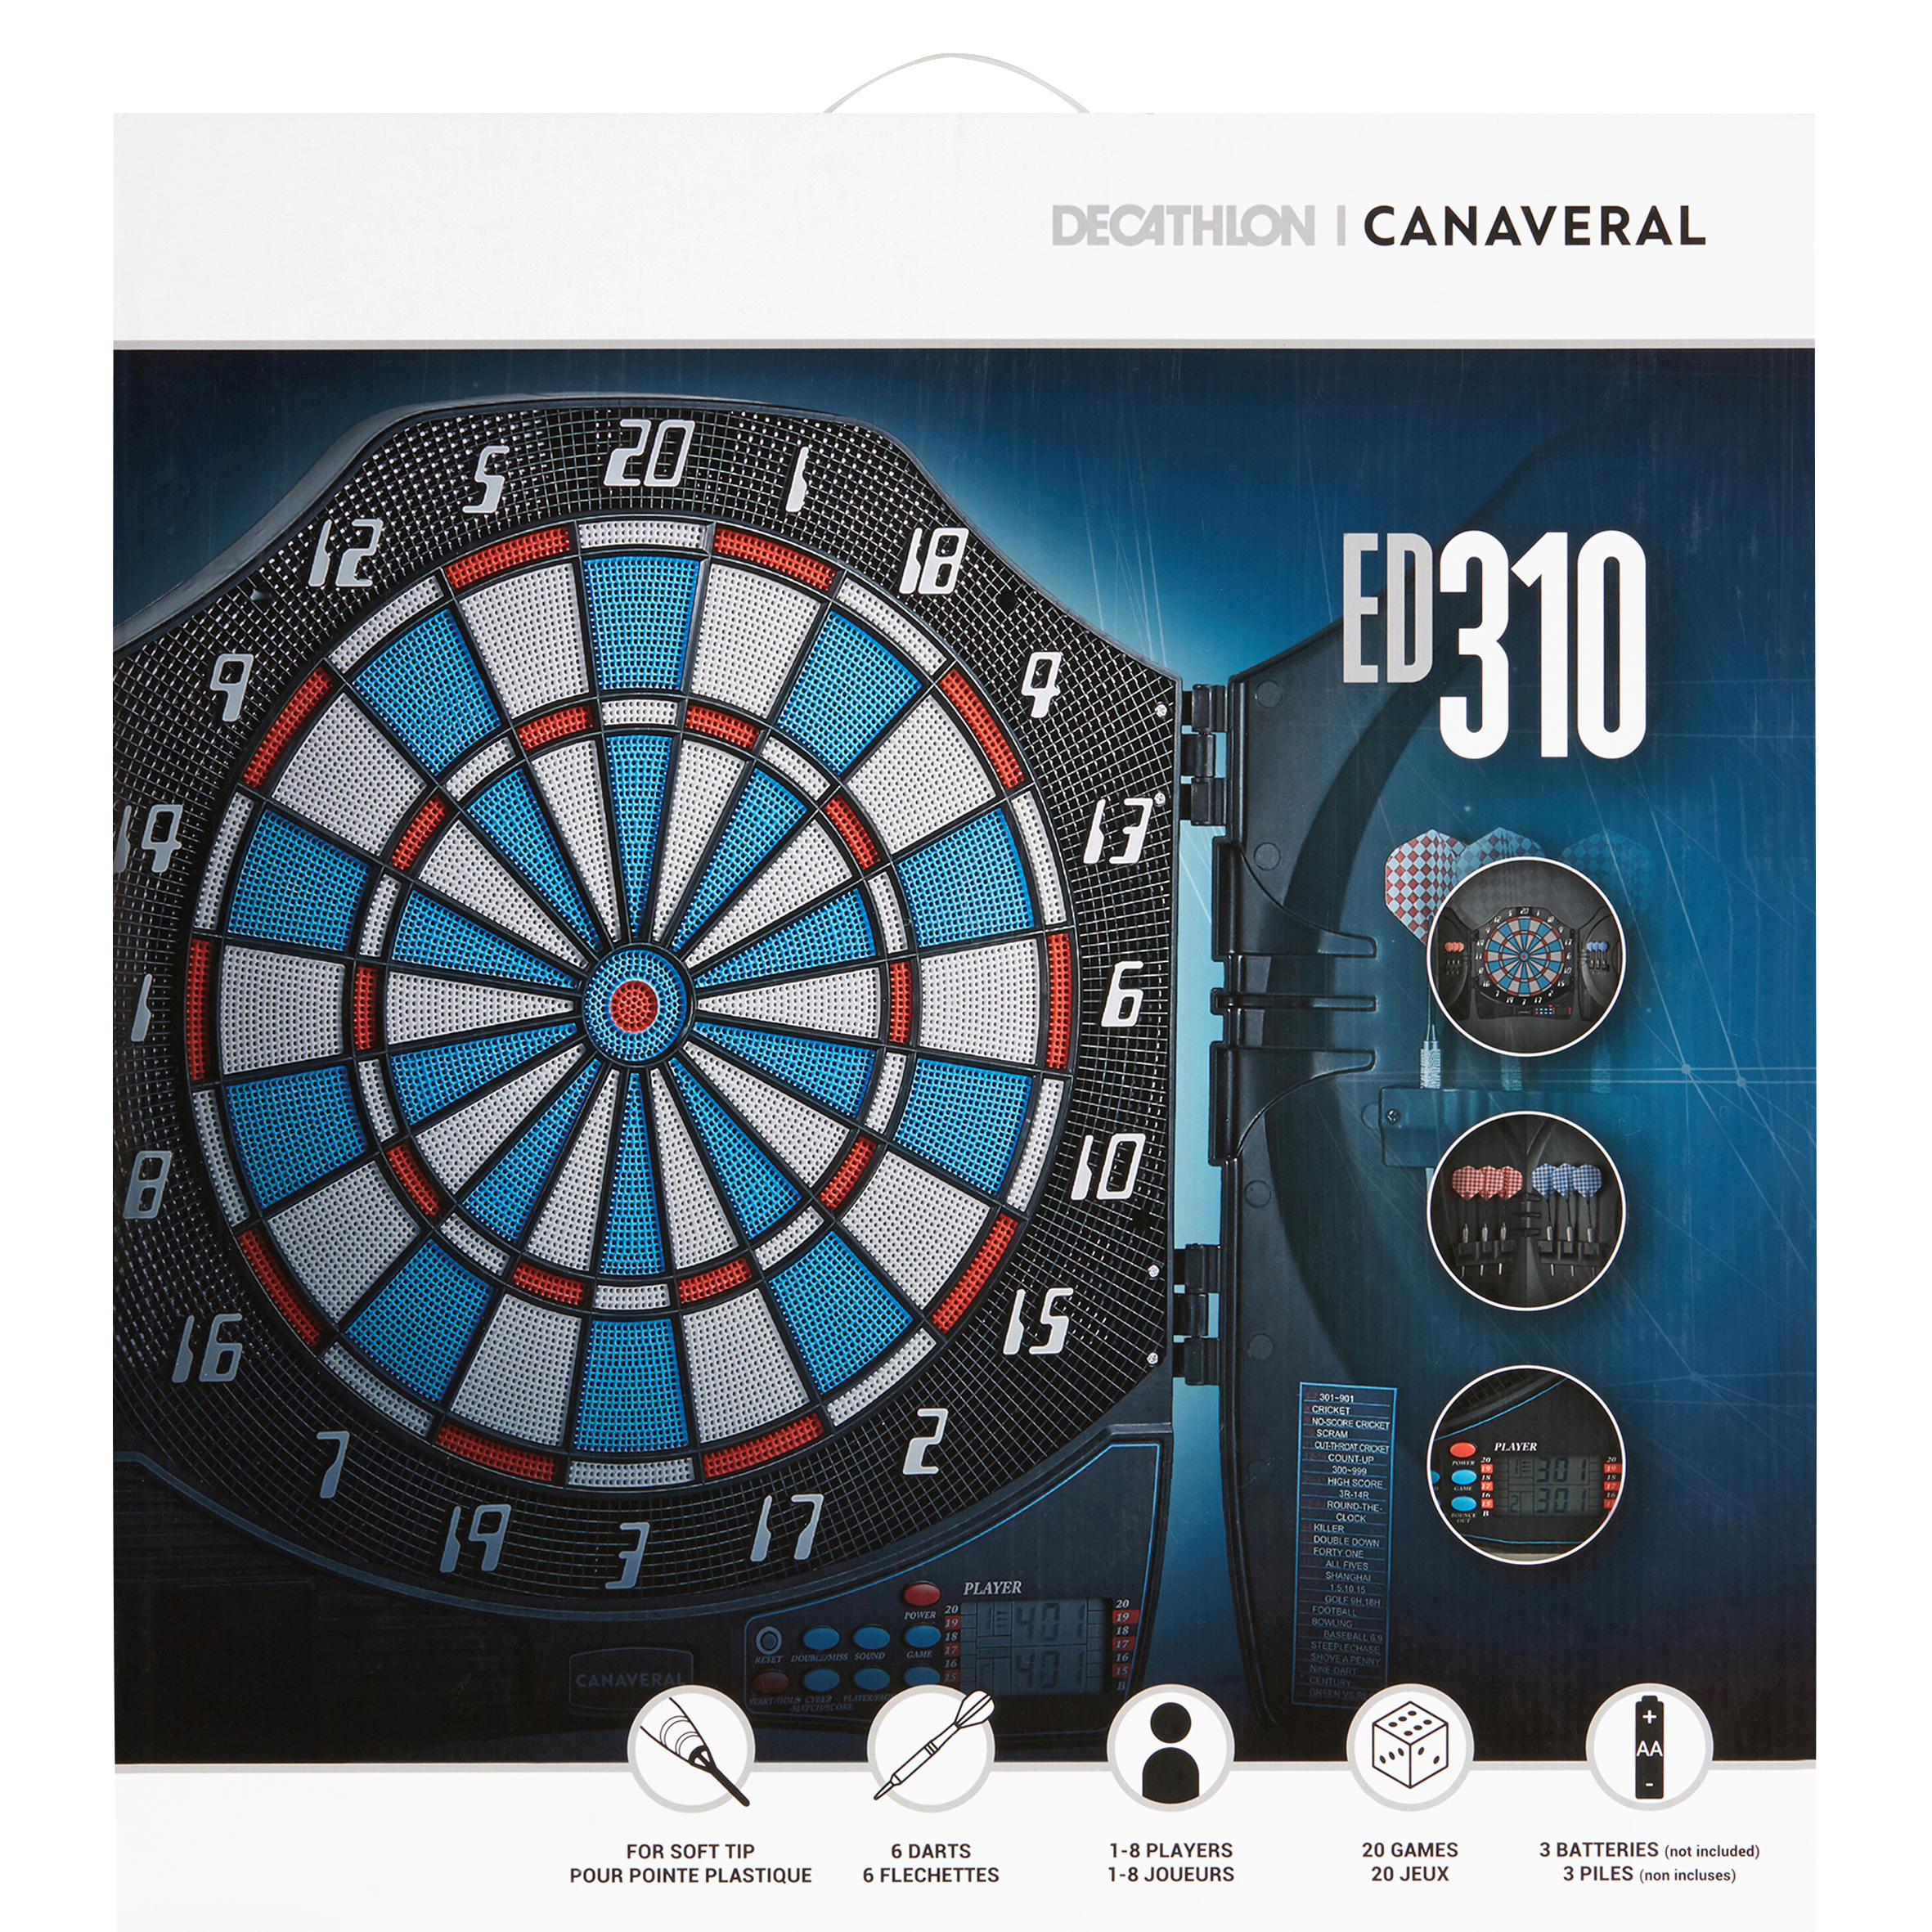 Electronic Dartboard - ED 310 - CANAVERAL